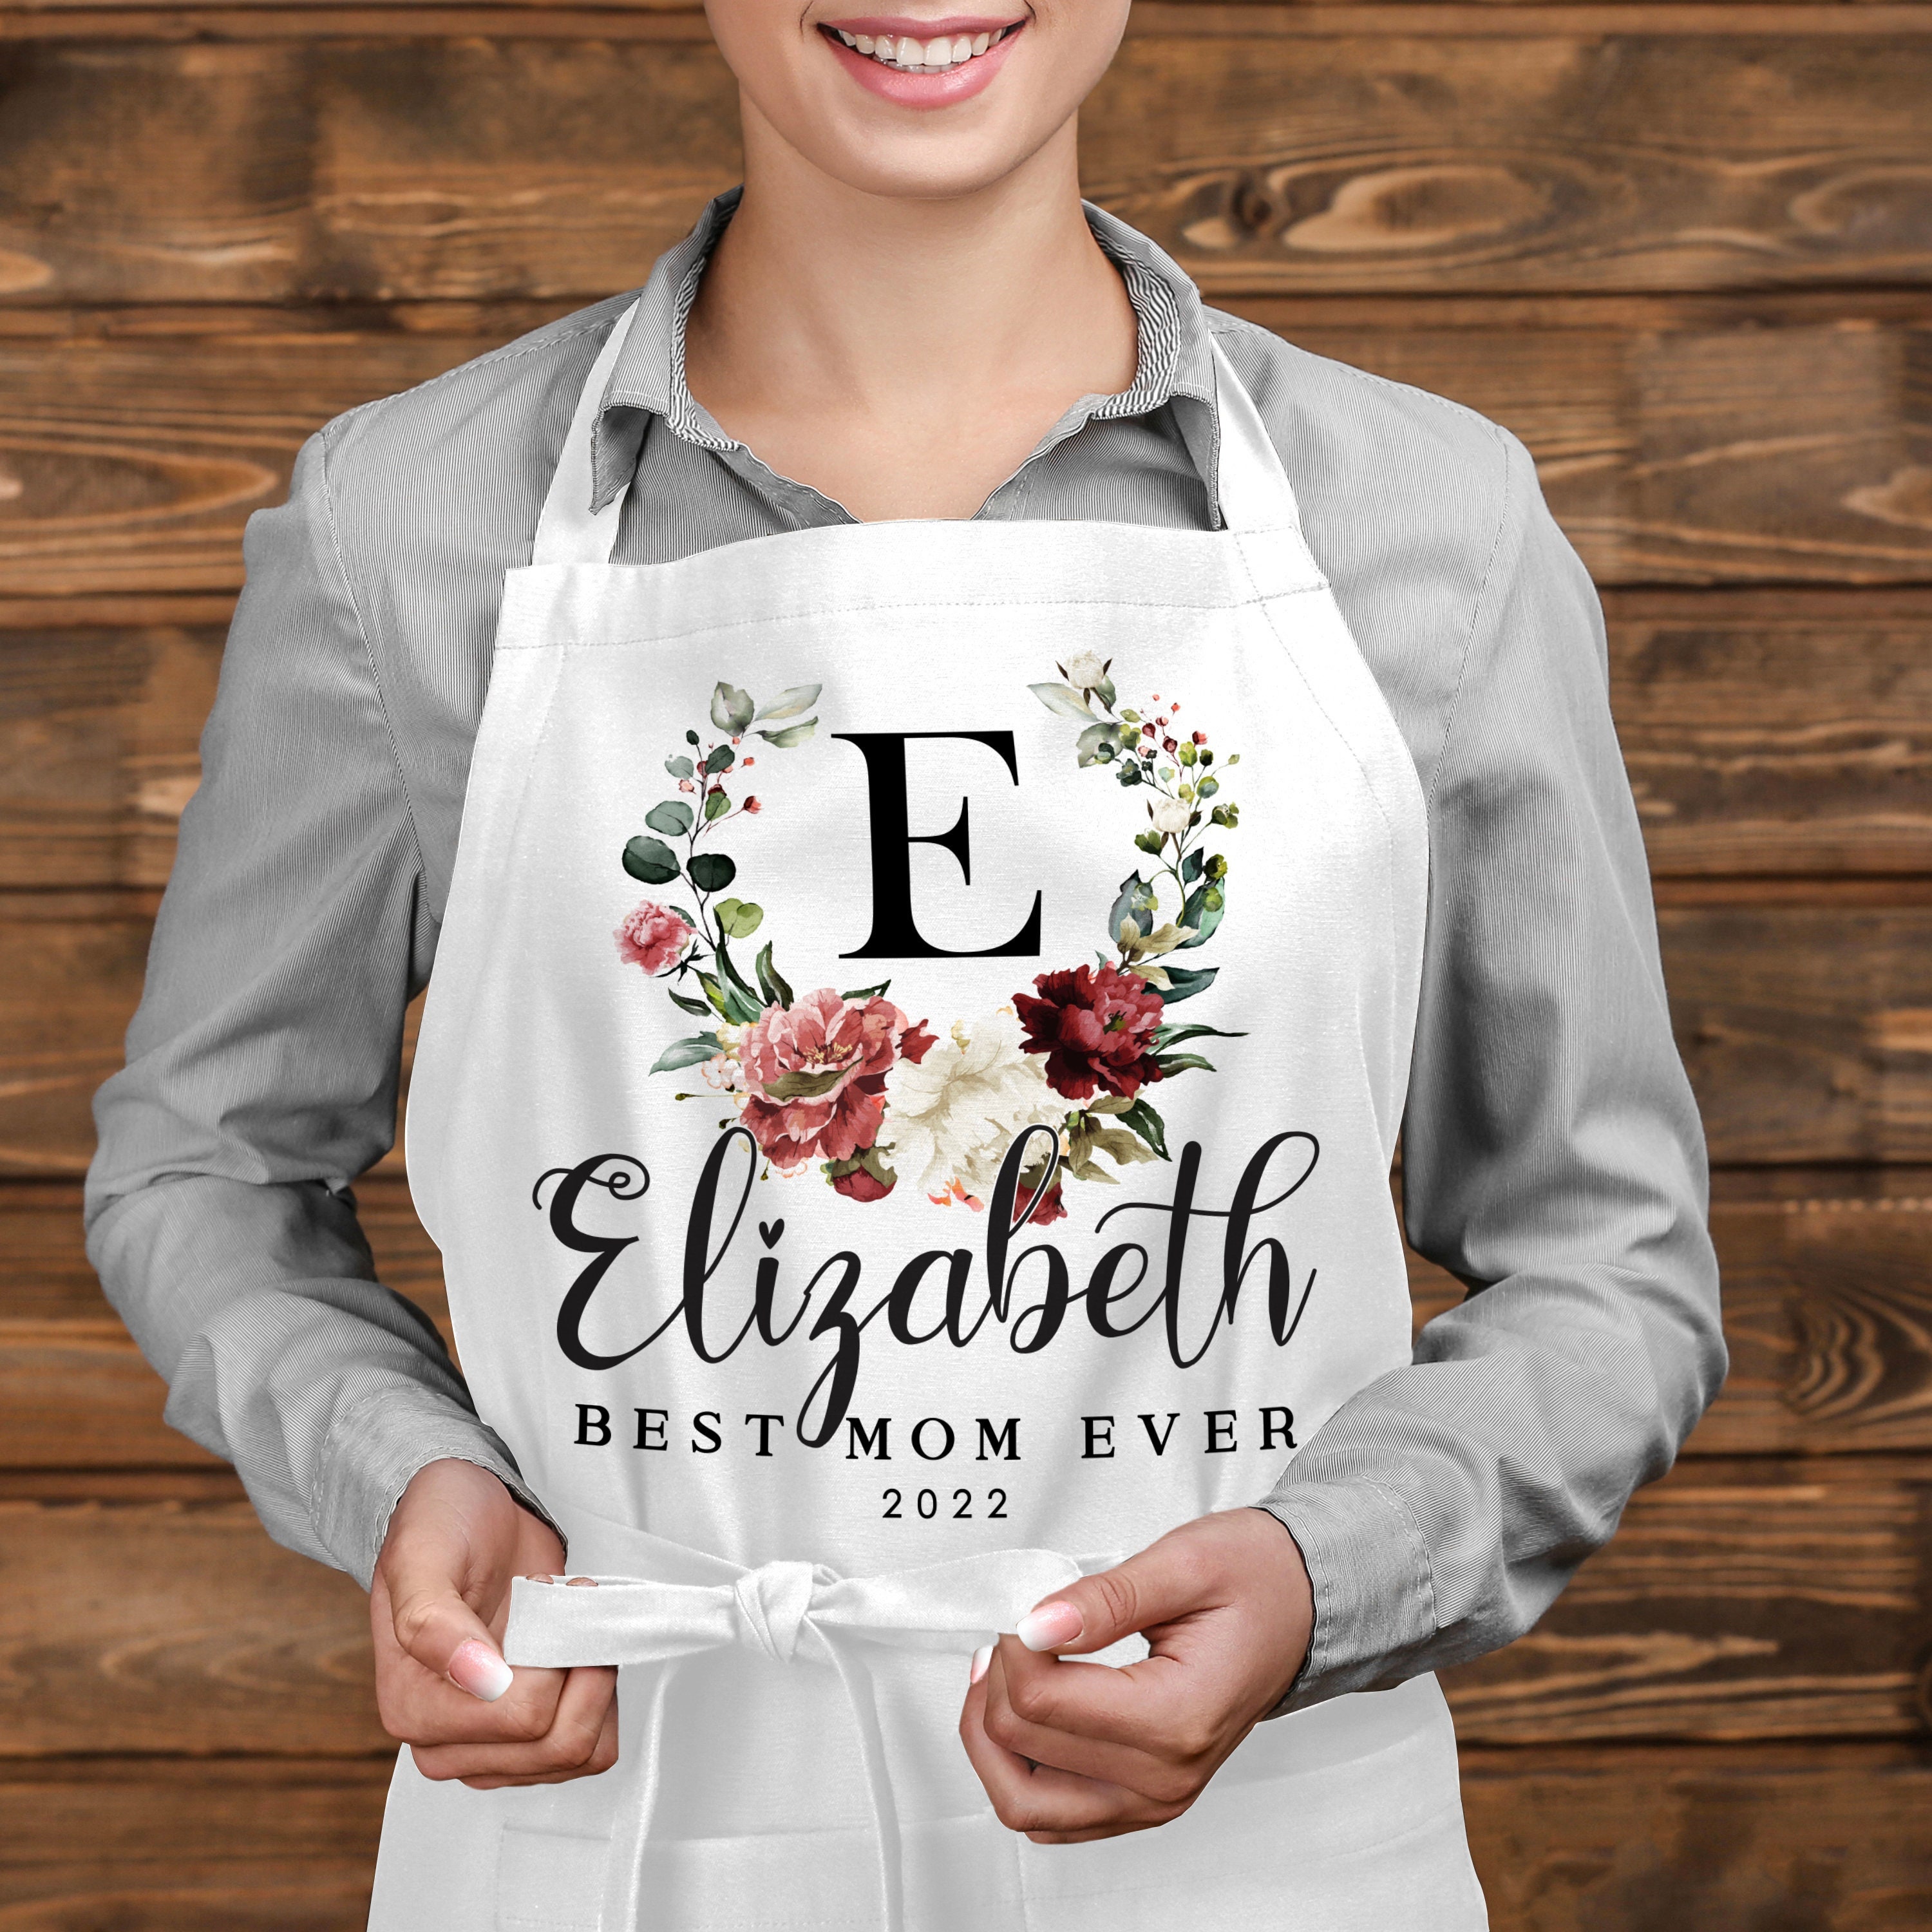  Kitchen Floral Apron Gift for Mother's Day - Personalized Mom  Aprons Gifts w/Pockets w/Name for Mother Men for Grilling Cooking BBQ Baking  Customized Funny Chef Apron for Mommy Custom Grandpa Gift